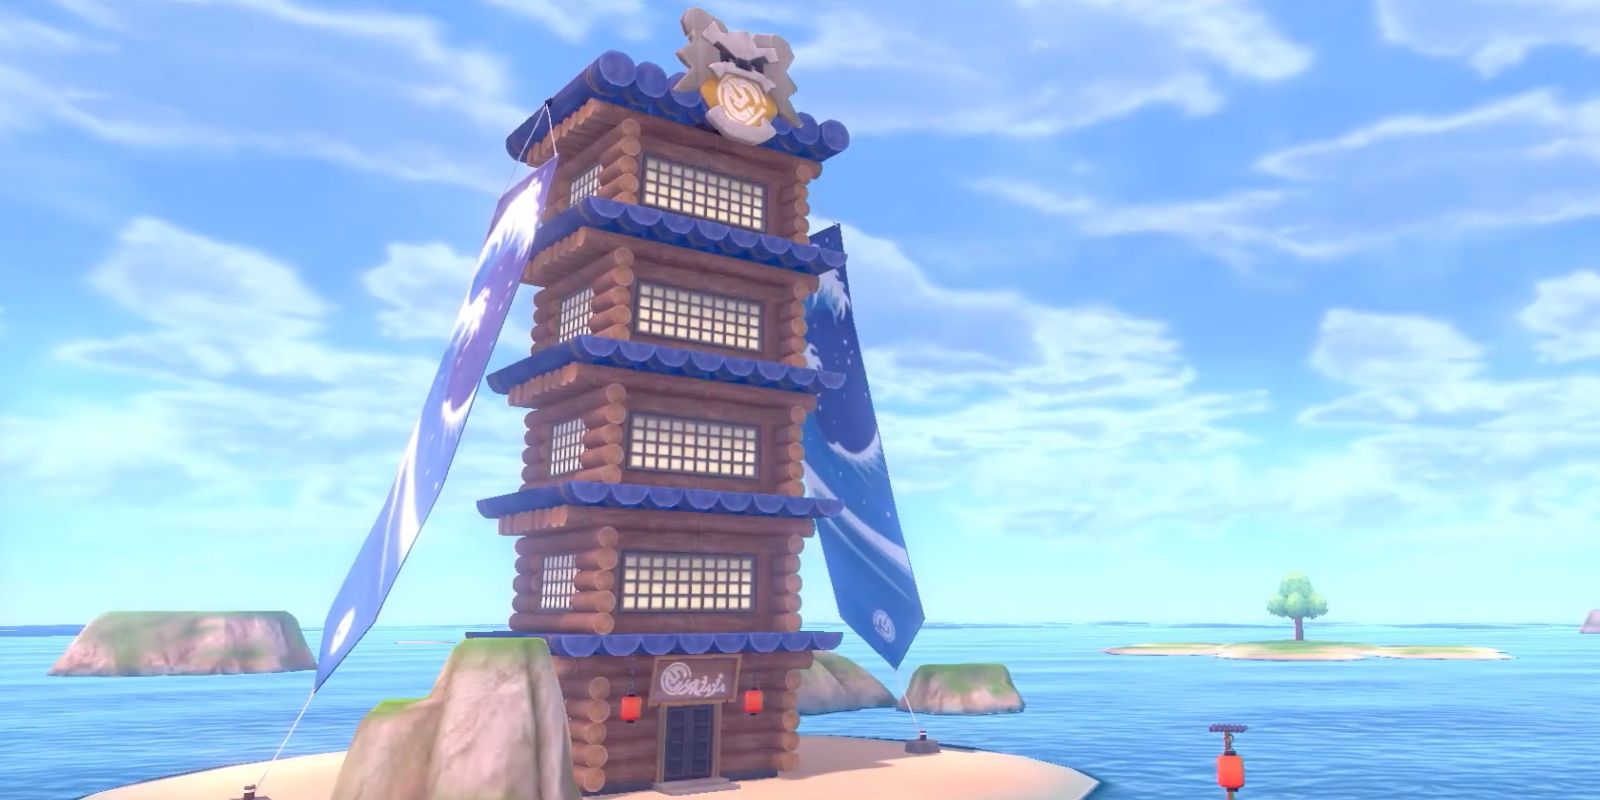 Pokémon Sword and Shield: Isle of Armor Tower of Darkness/Tower of